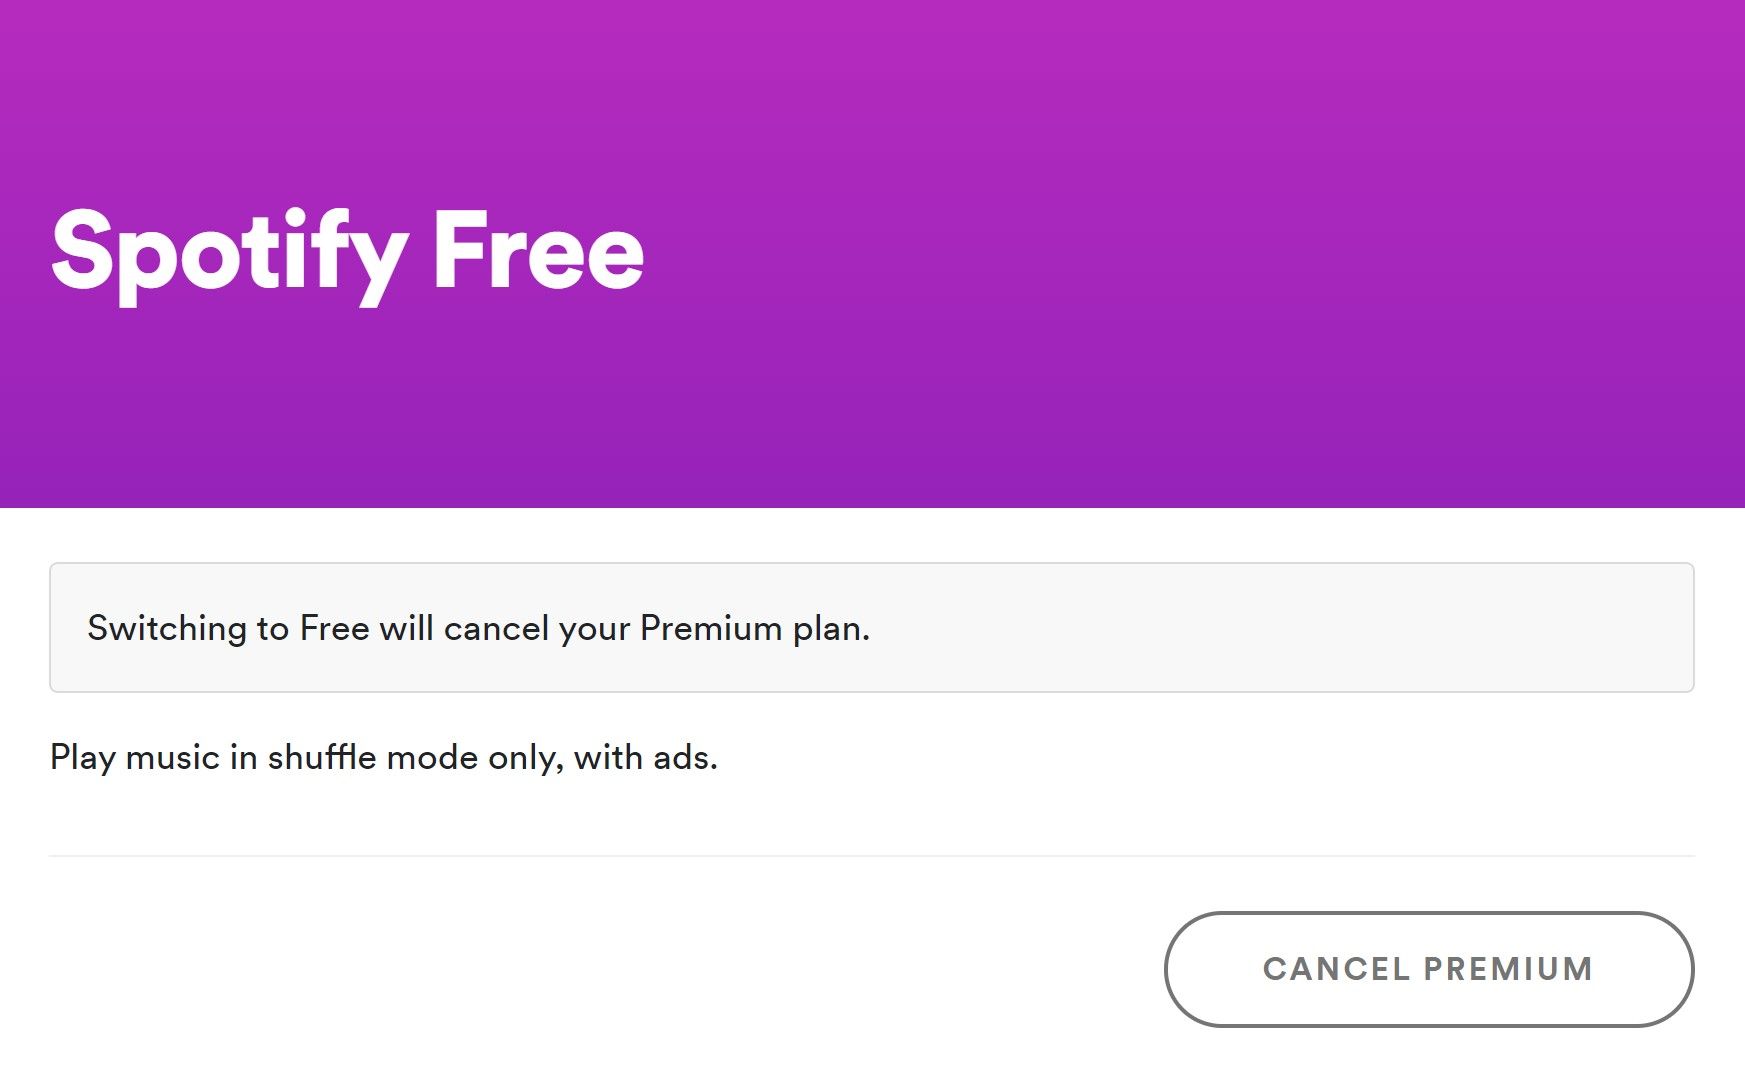 How to Trial Spotify Premium for Free (Without Getting Charged)